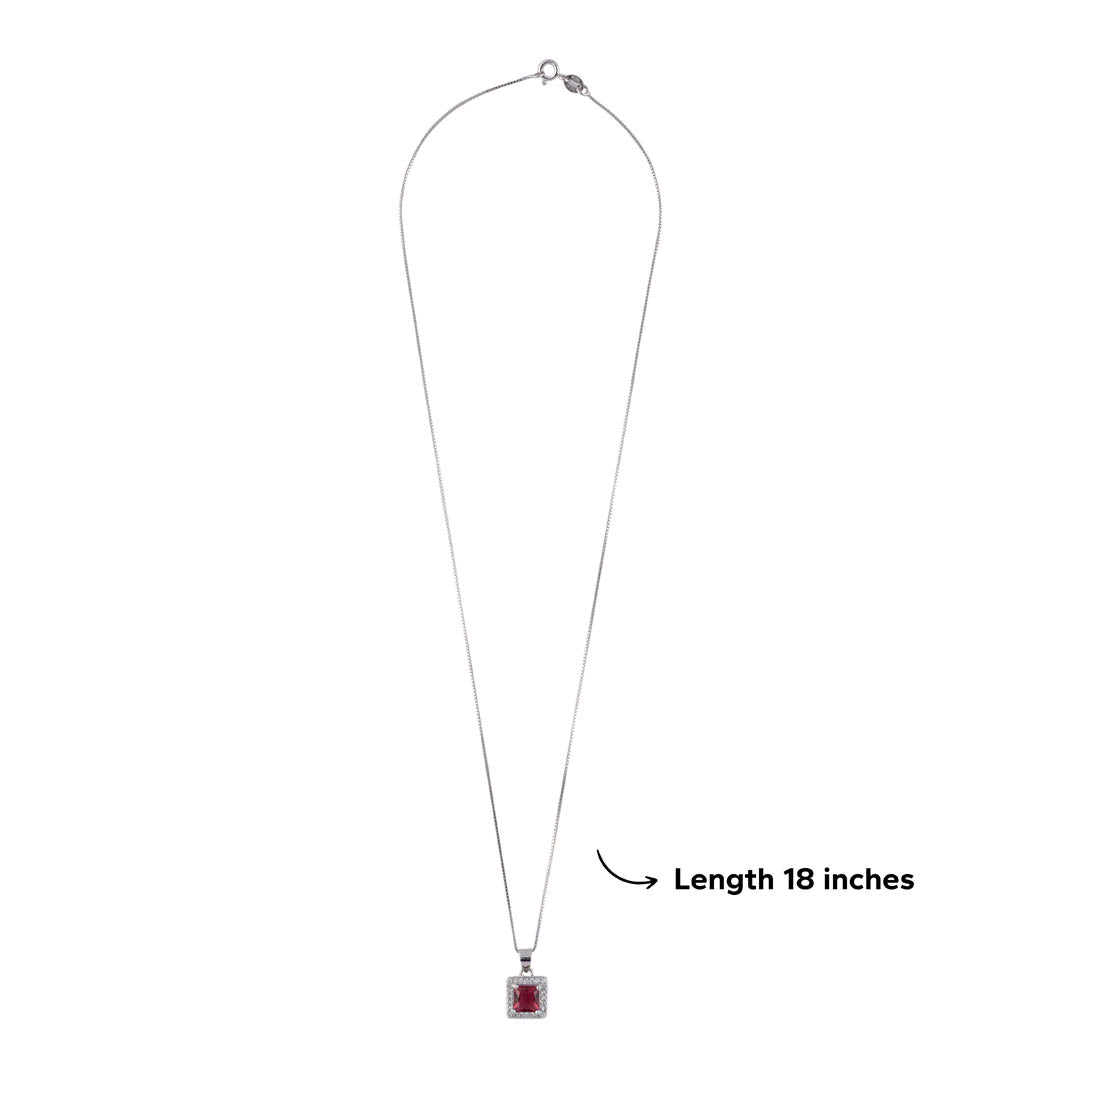 Real Silver Set Chain Pendant and Earrings with Red Stones for Women